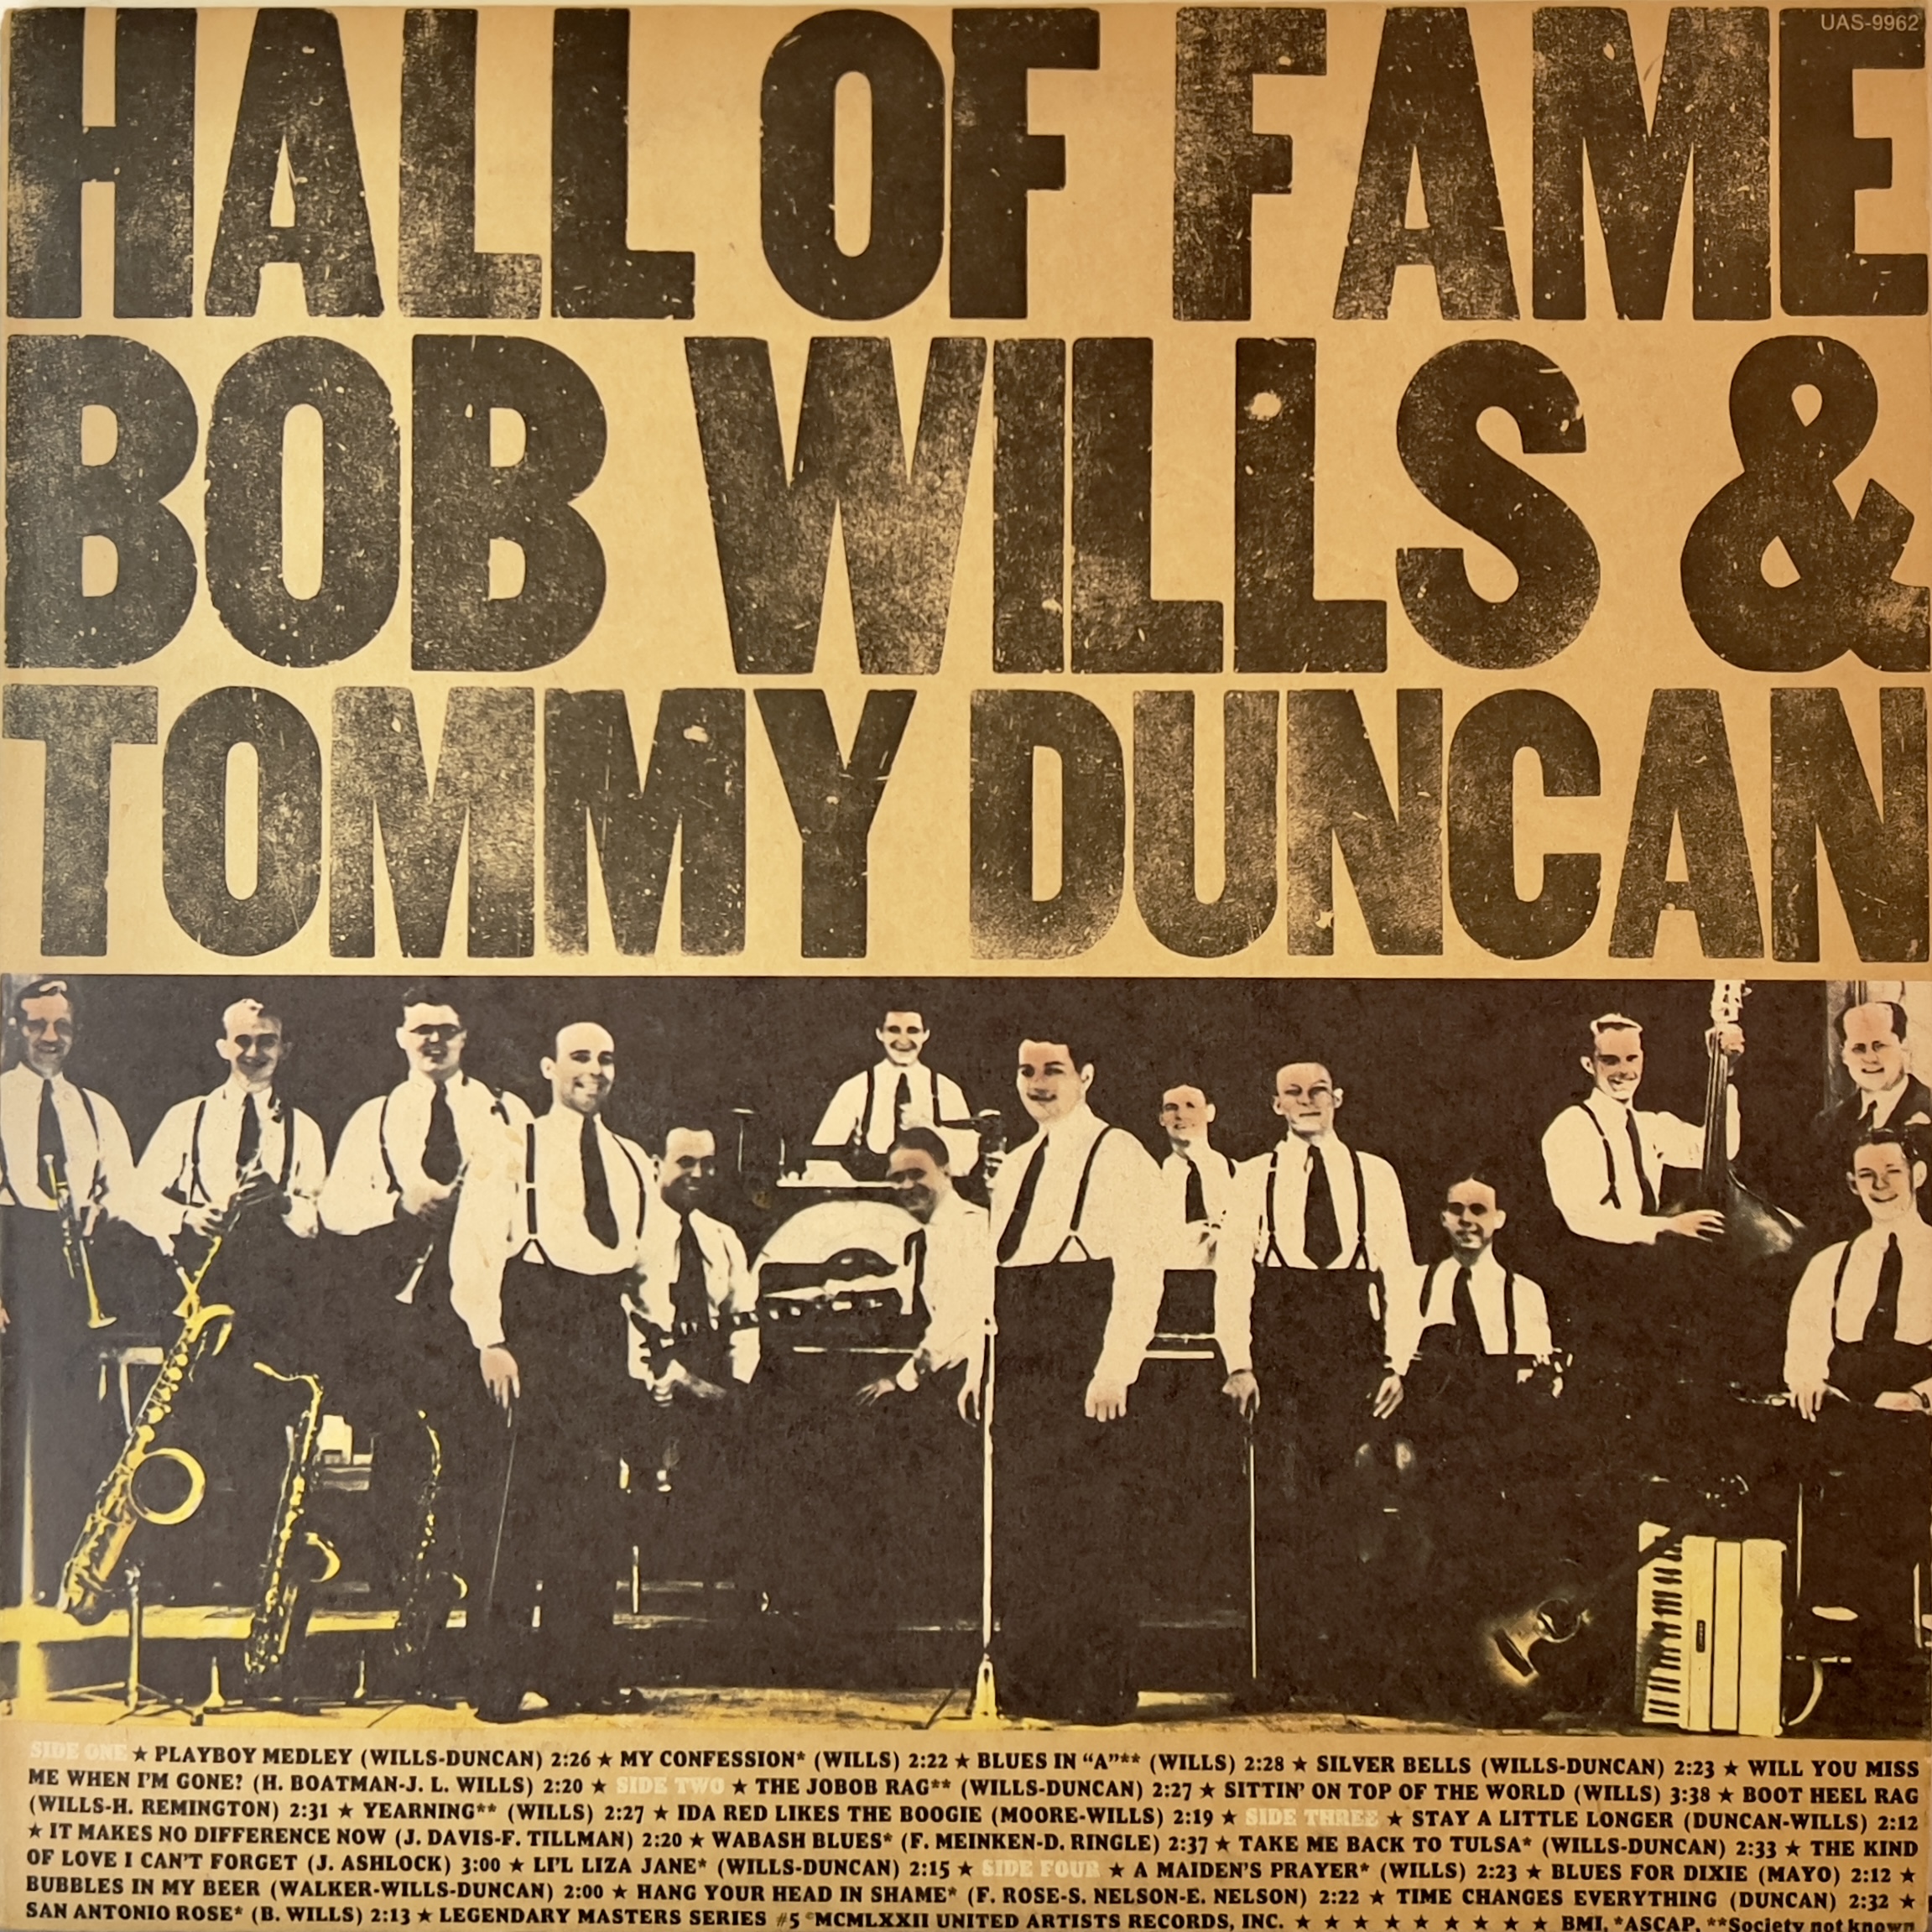 Hall of Fame by Bob Wills & Tommy Duncan (Vinyl record album review)